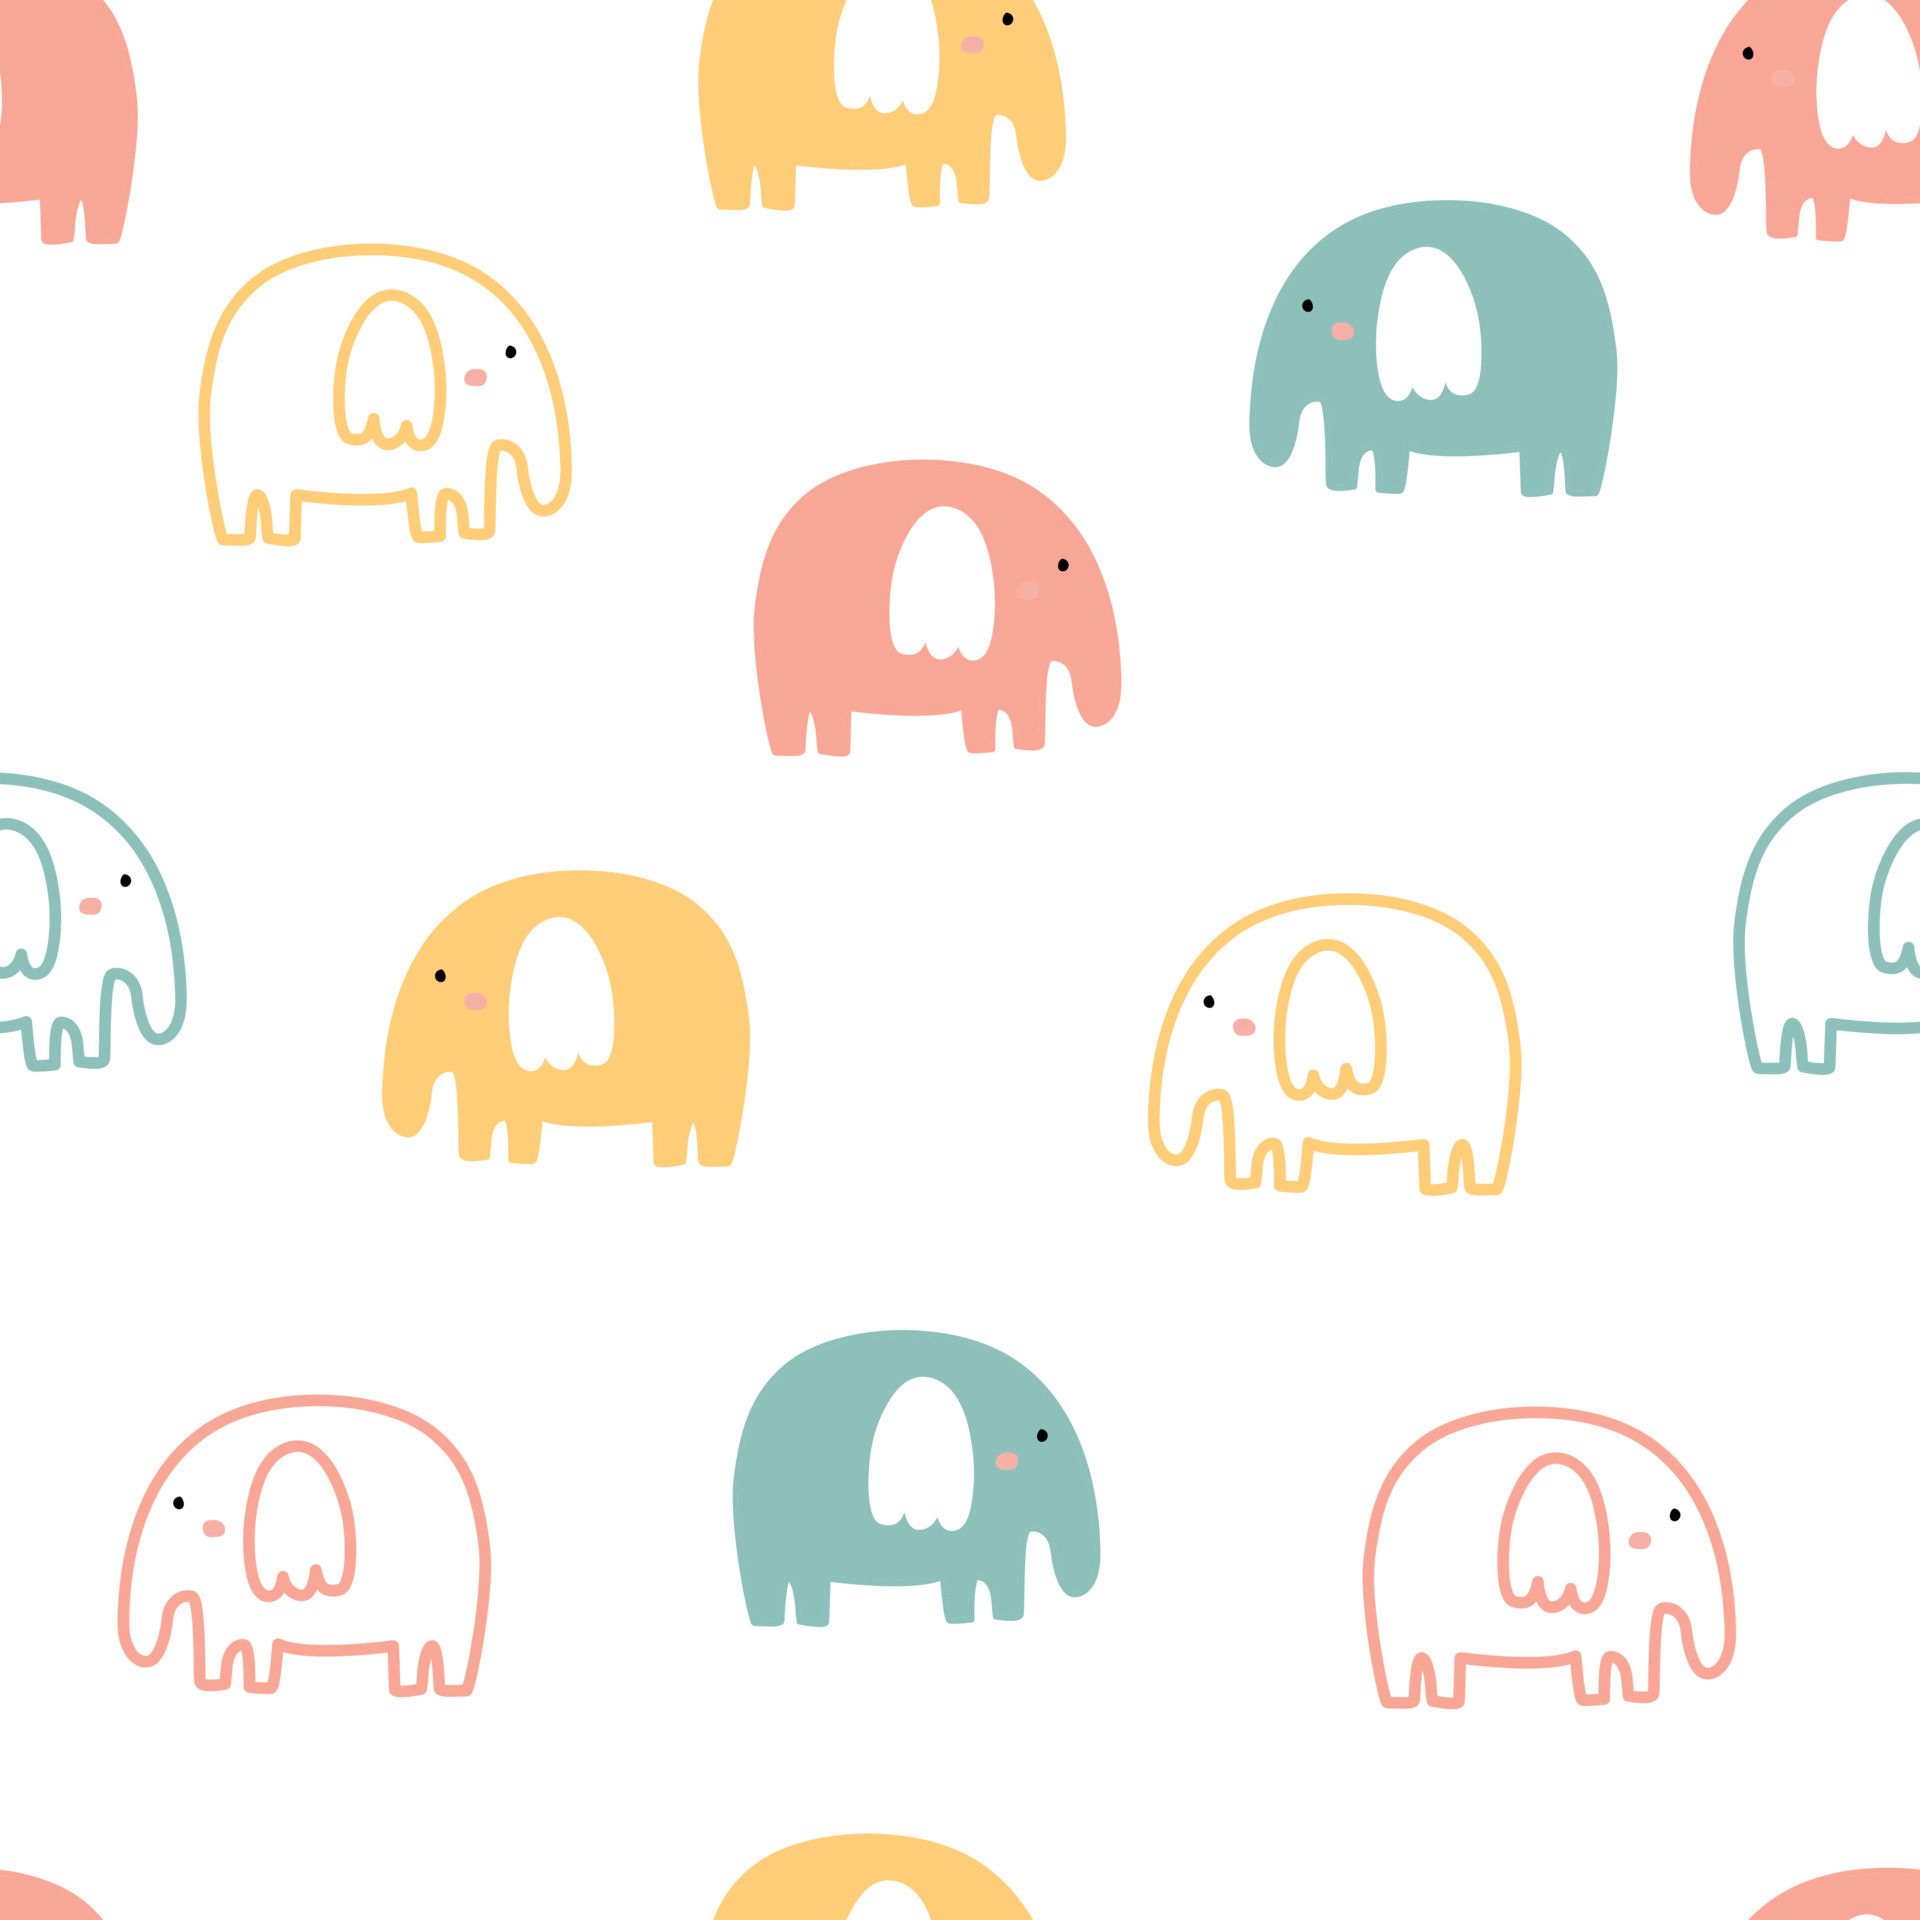 A pattern of colorful elephants on a white background - Elephant